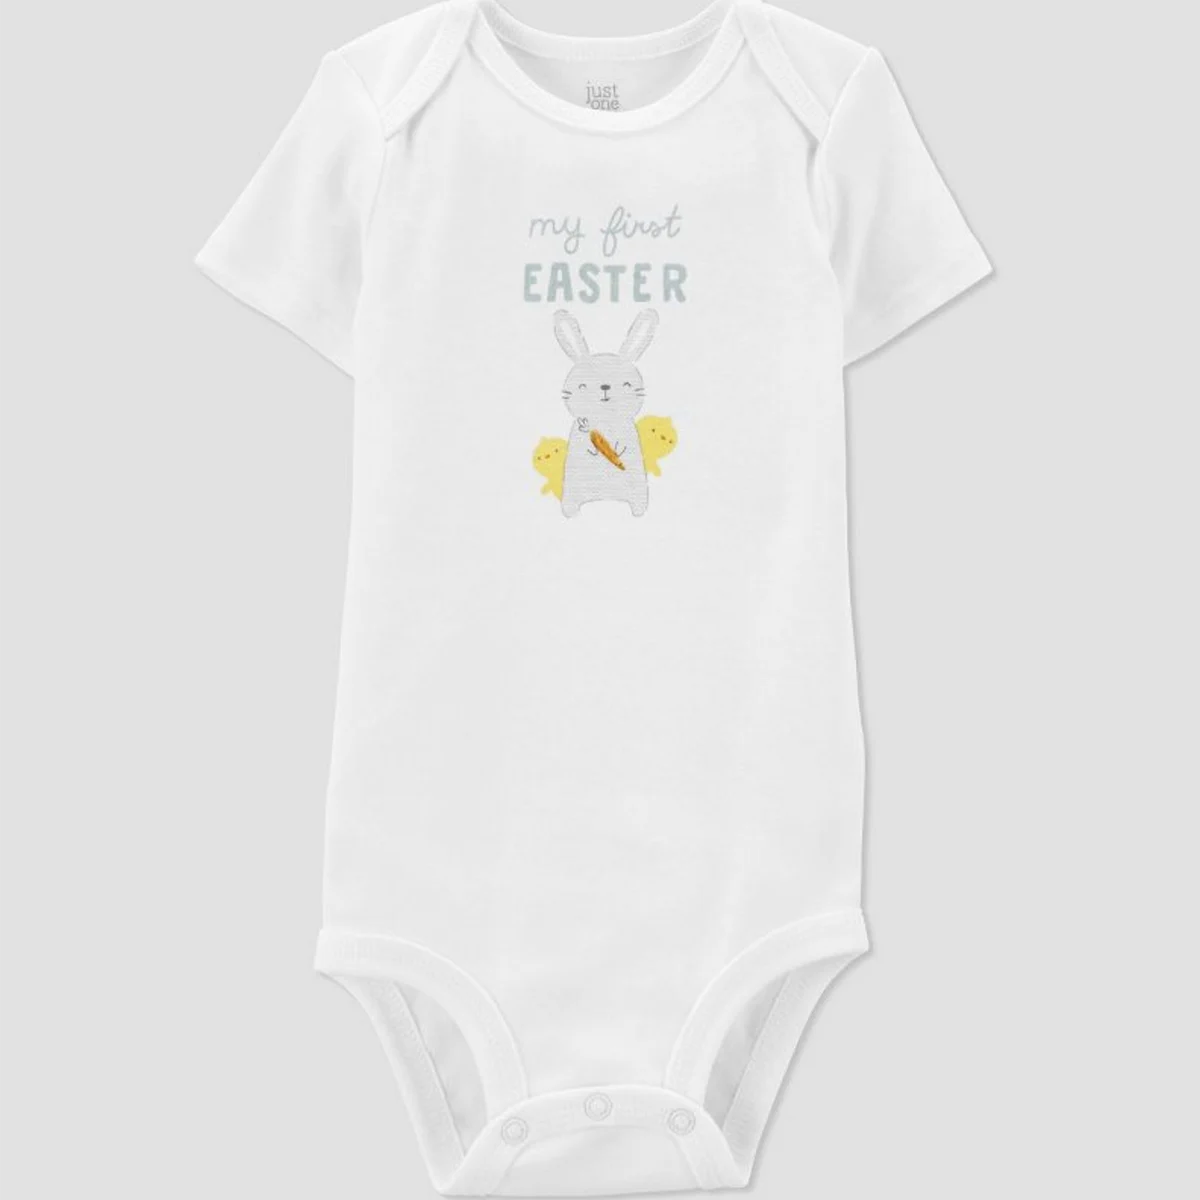 20 Adorable Easter Outfits for Baby's First Easter